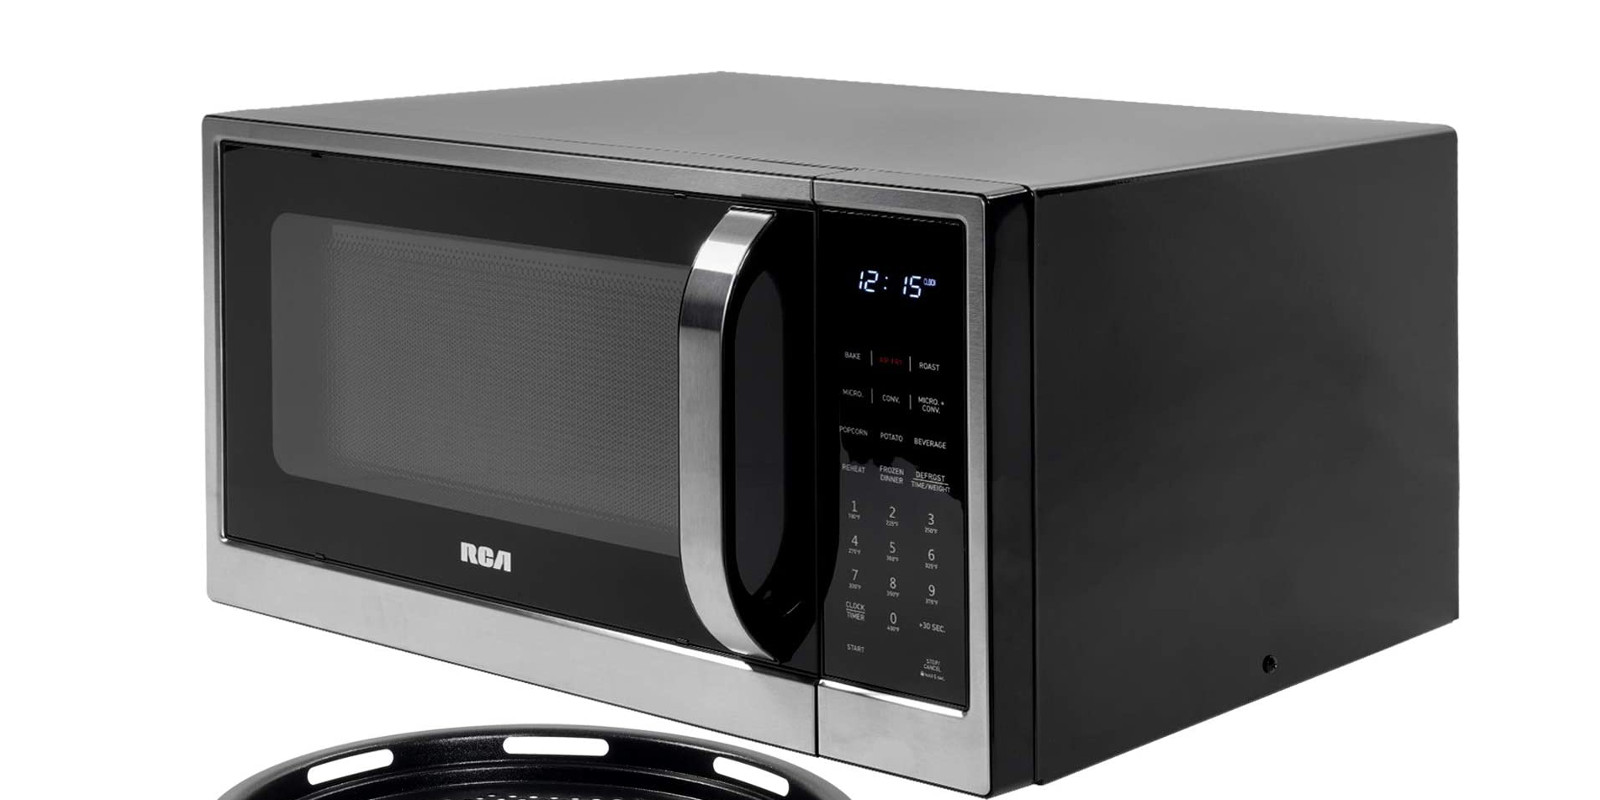 Stainless Steel Multi-Use Appliance for Fast and Healthy Cooking RMW1205 RCA 1.2 Cu Ft Microwave with Air Fryer Convection Oven and Accessories